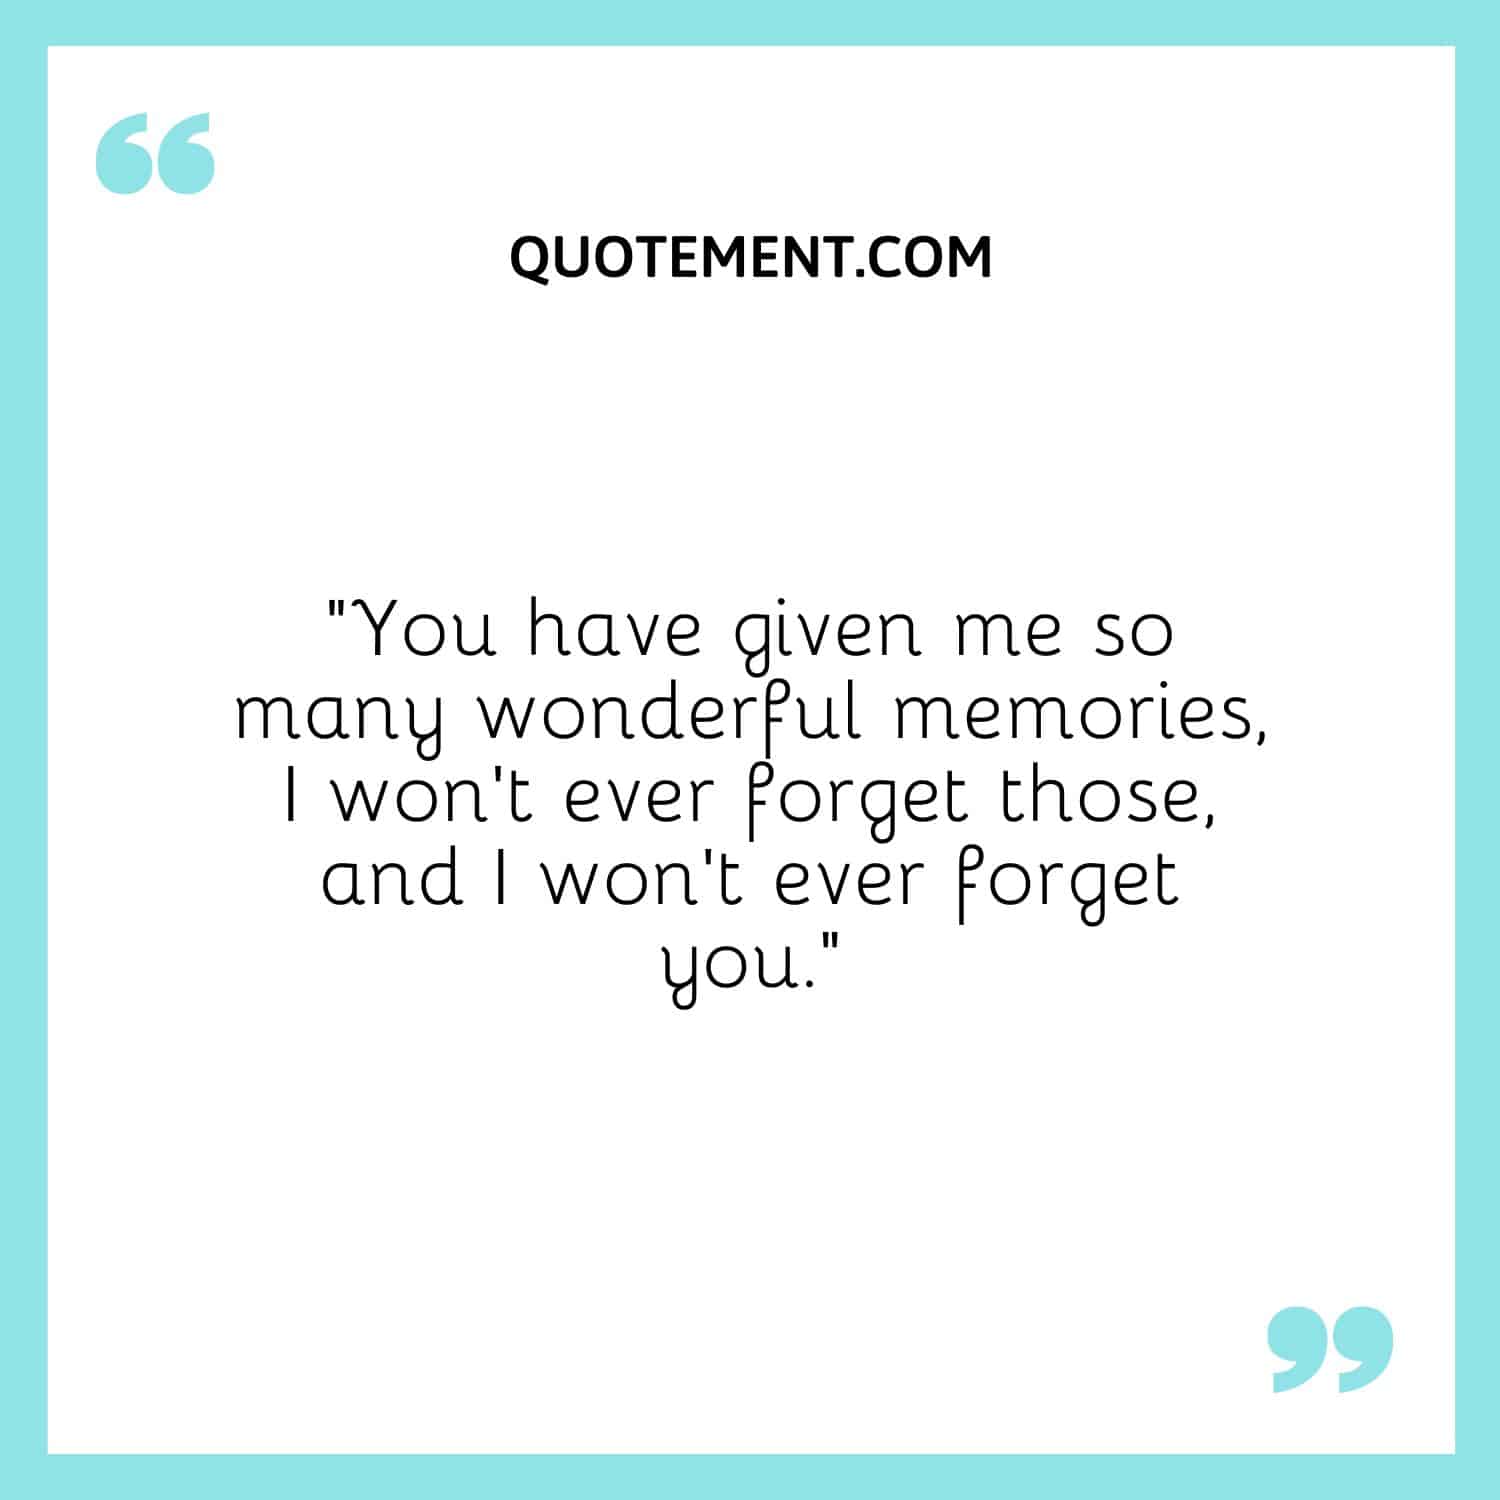 You have given me so many wonderful memories